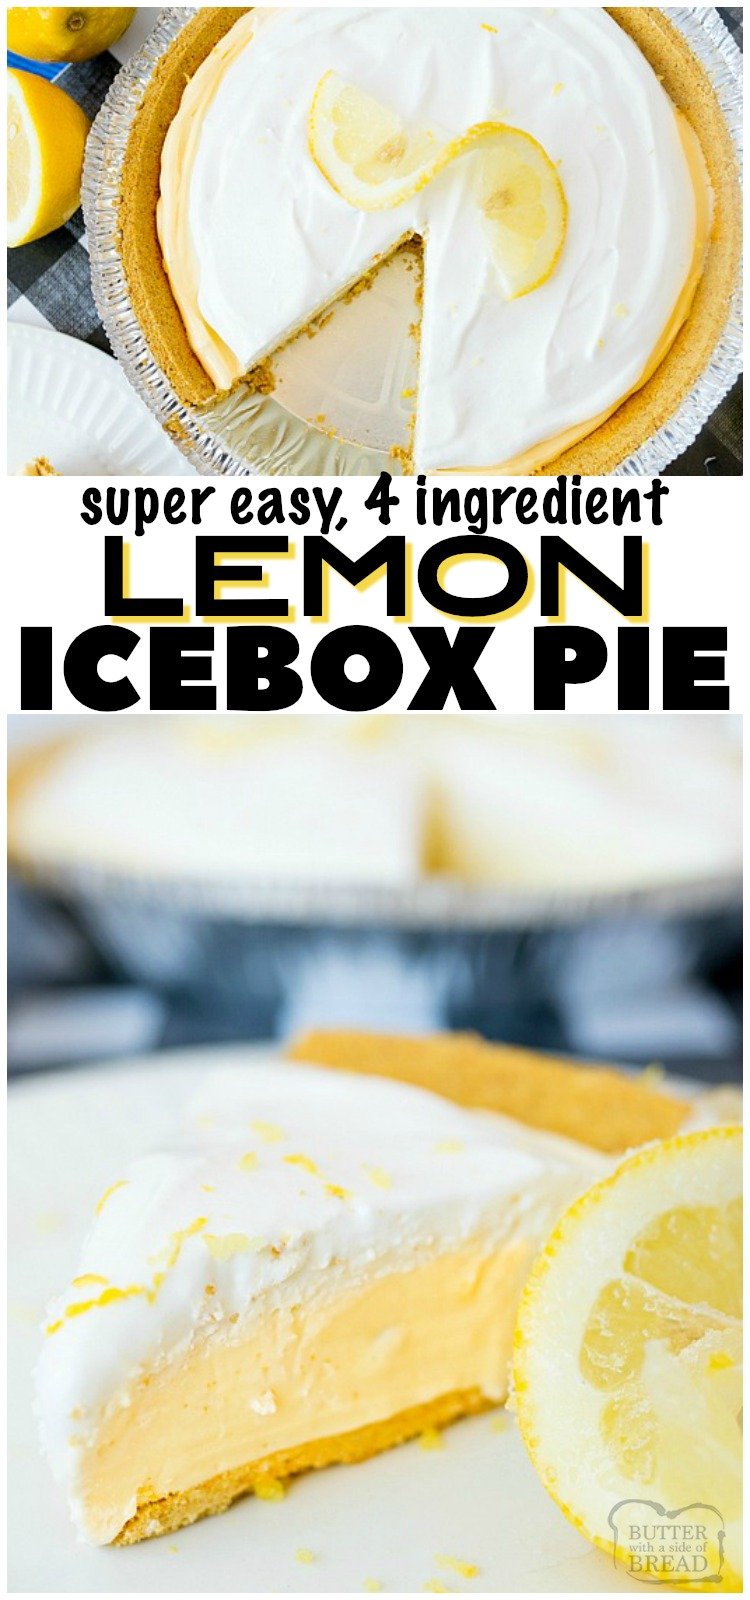 Lemon Icebox Pie is a quick an easy frozen lemon dessert. This pie has a classic tart lemonade flavor & is made from only FOUR simple ingredients! Simple to make and everyone loves this sweet, creamy lemon pie. #pie #lemon #icebox #dessert #easy #recipe #summer #spring #food from BUTTER WITH A SIDE OF BREAD